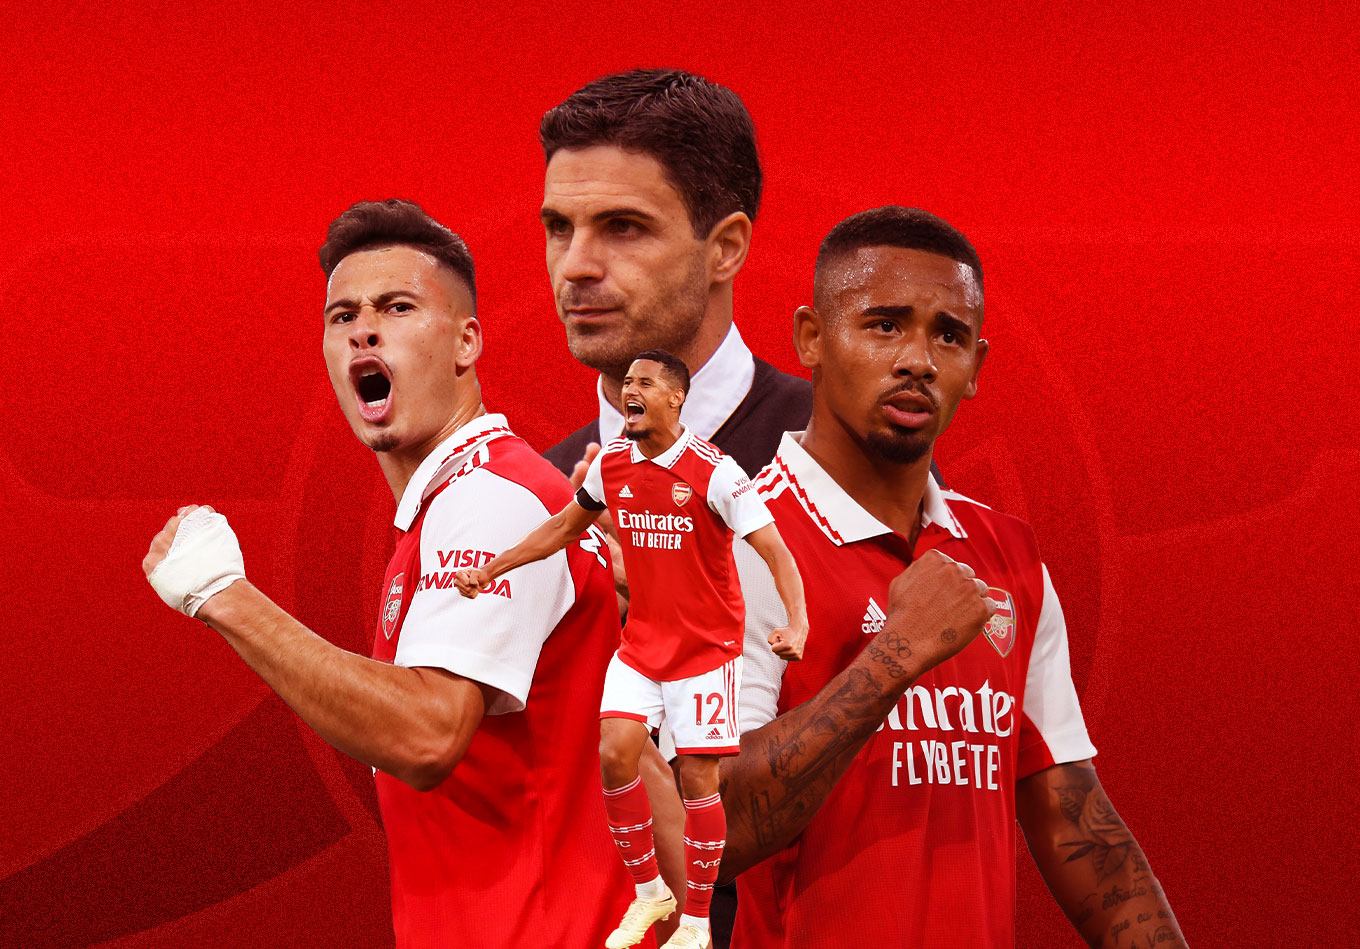 Top Gun: How Arteta Has Turned Arsenal Into the Real Deal